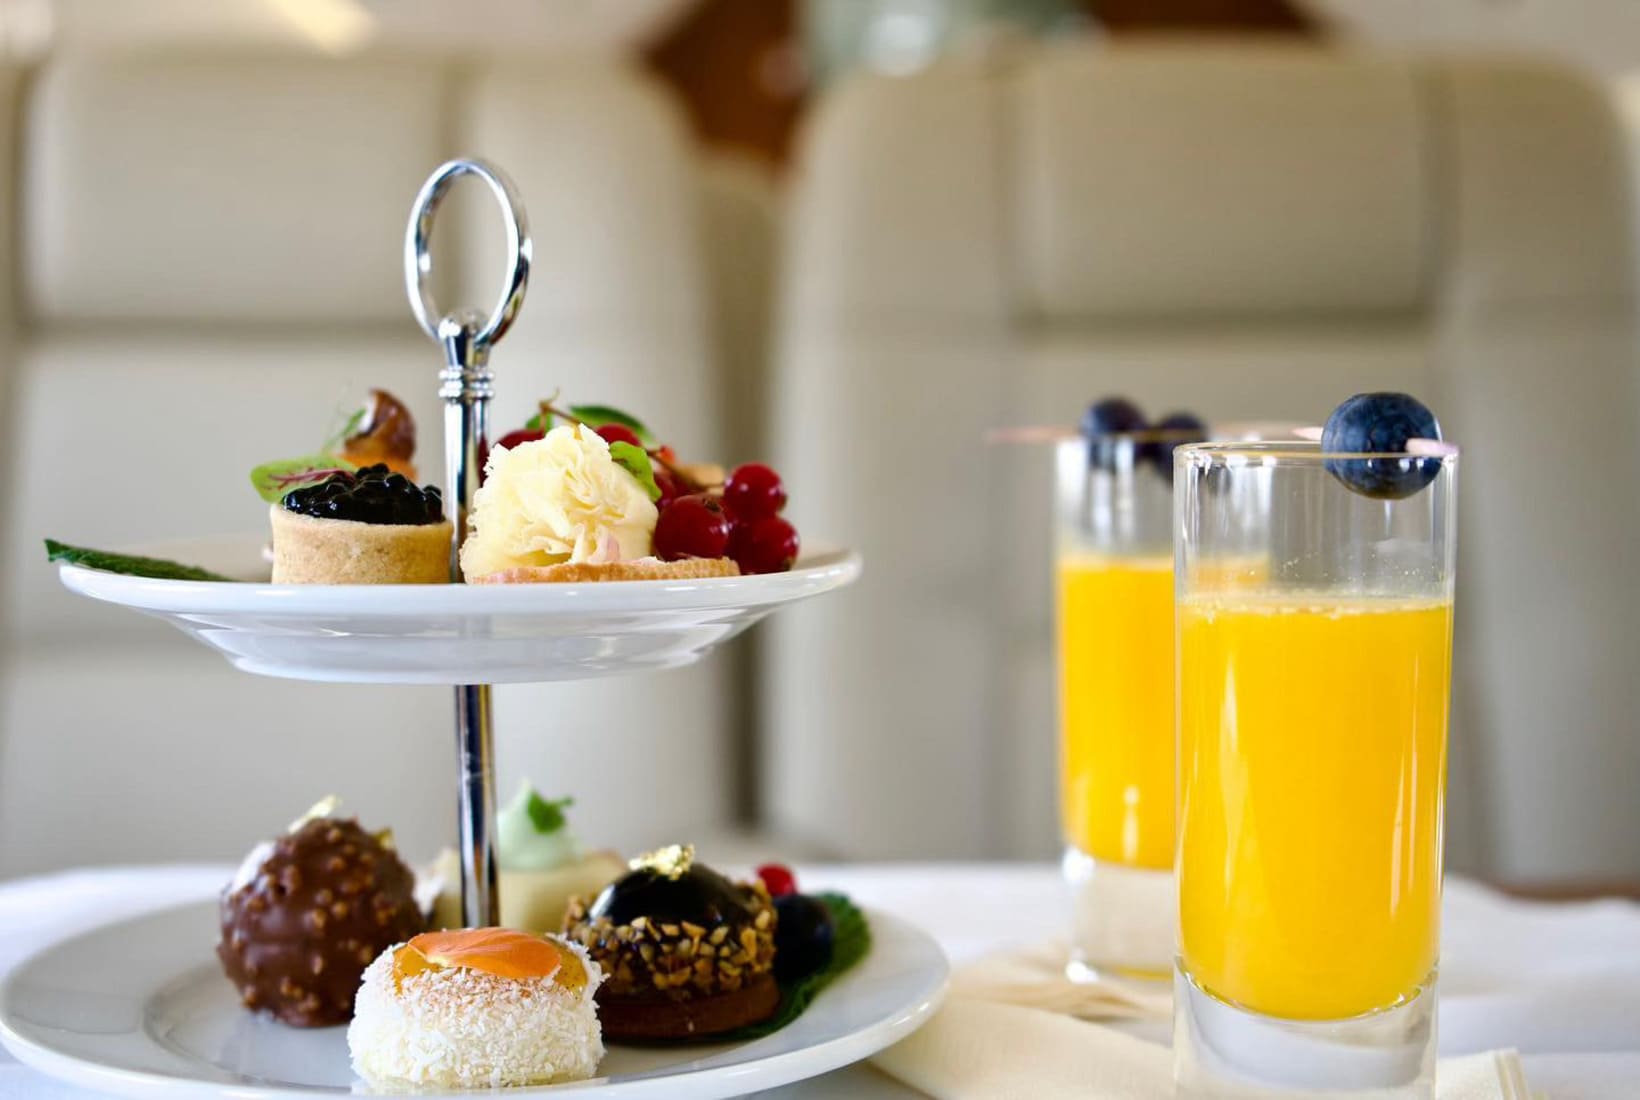 Small cake and drinks on a private jet